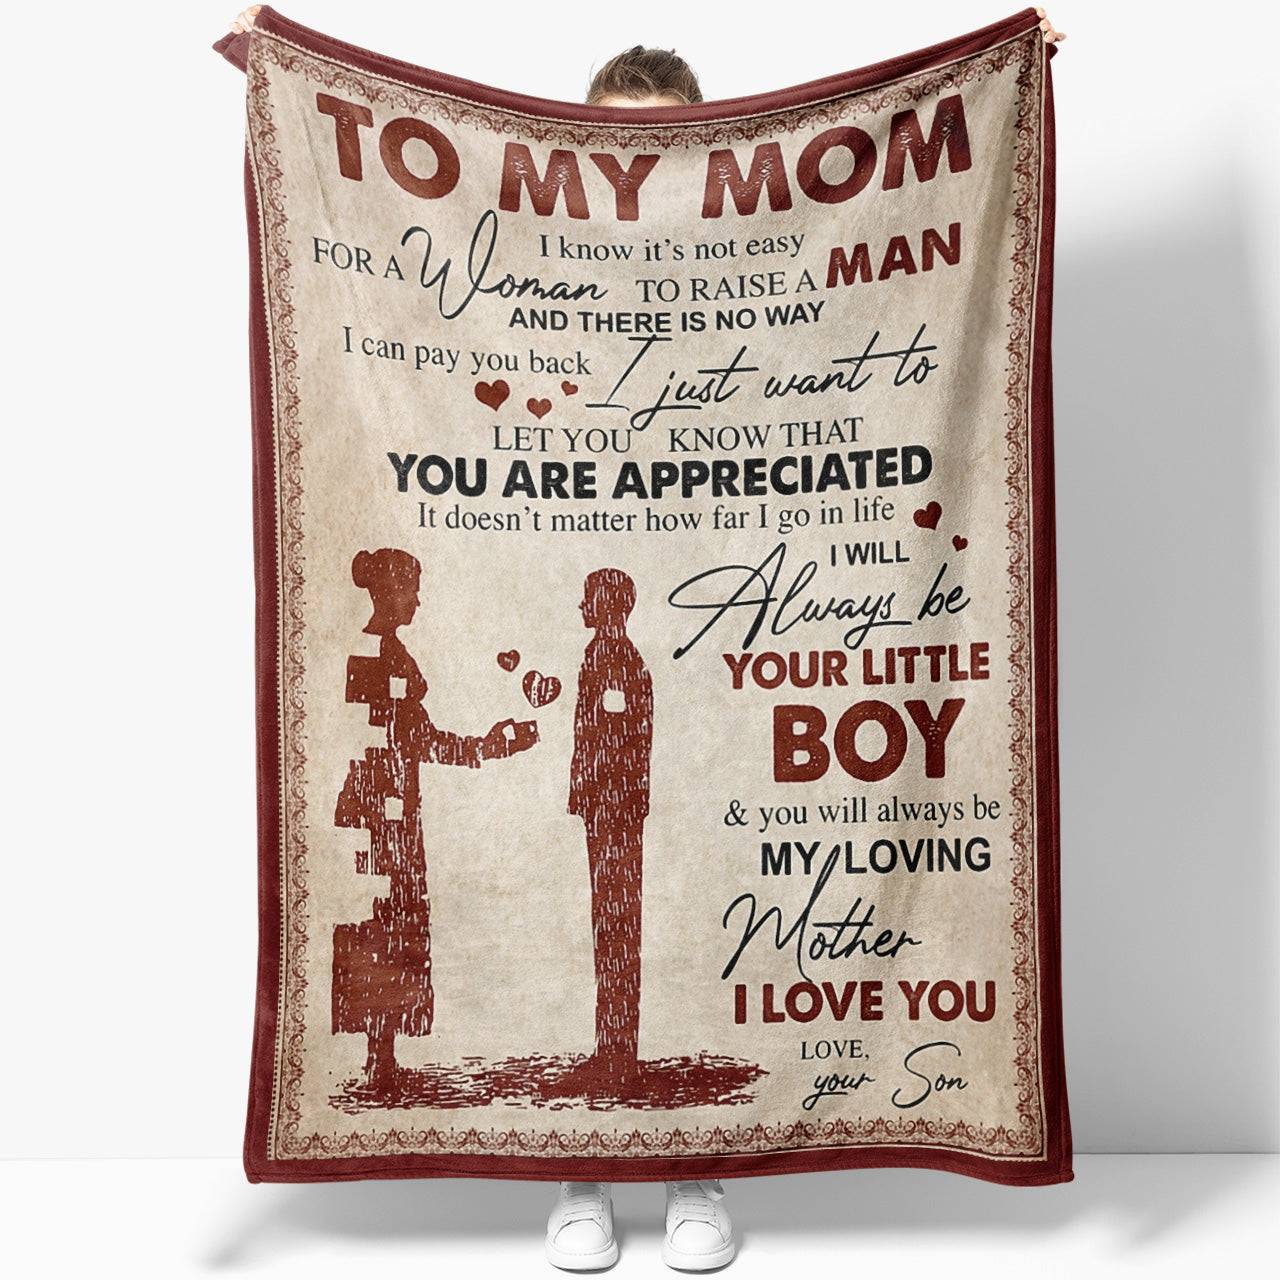 Unique Gifts for Mom  Meaningful Gift Ideas She'll Love! - Sunday